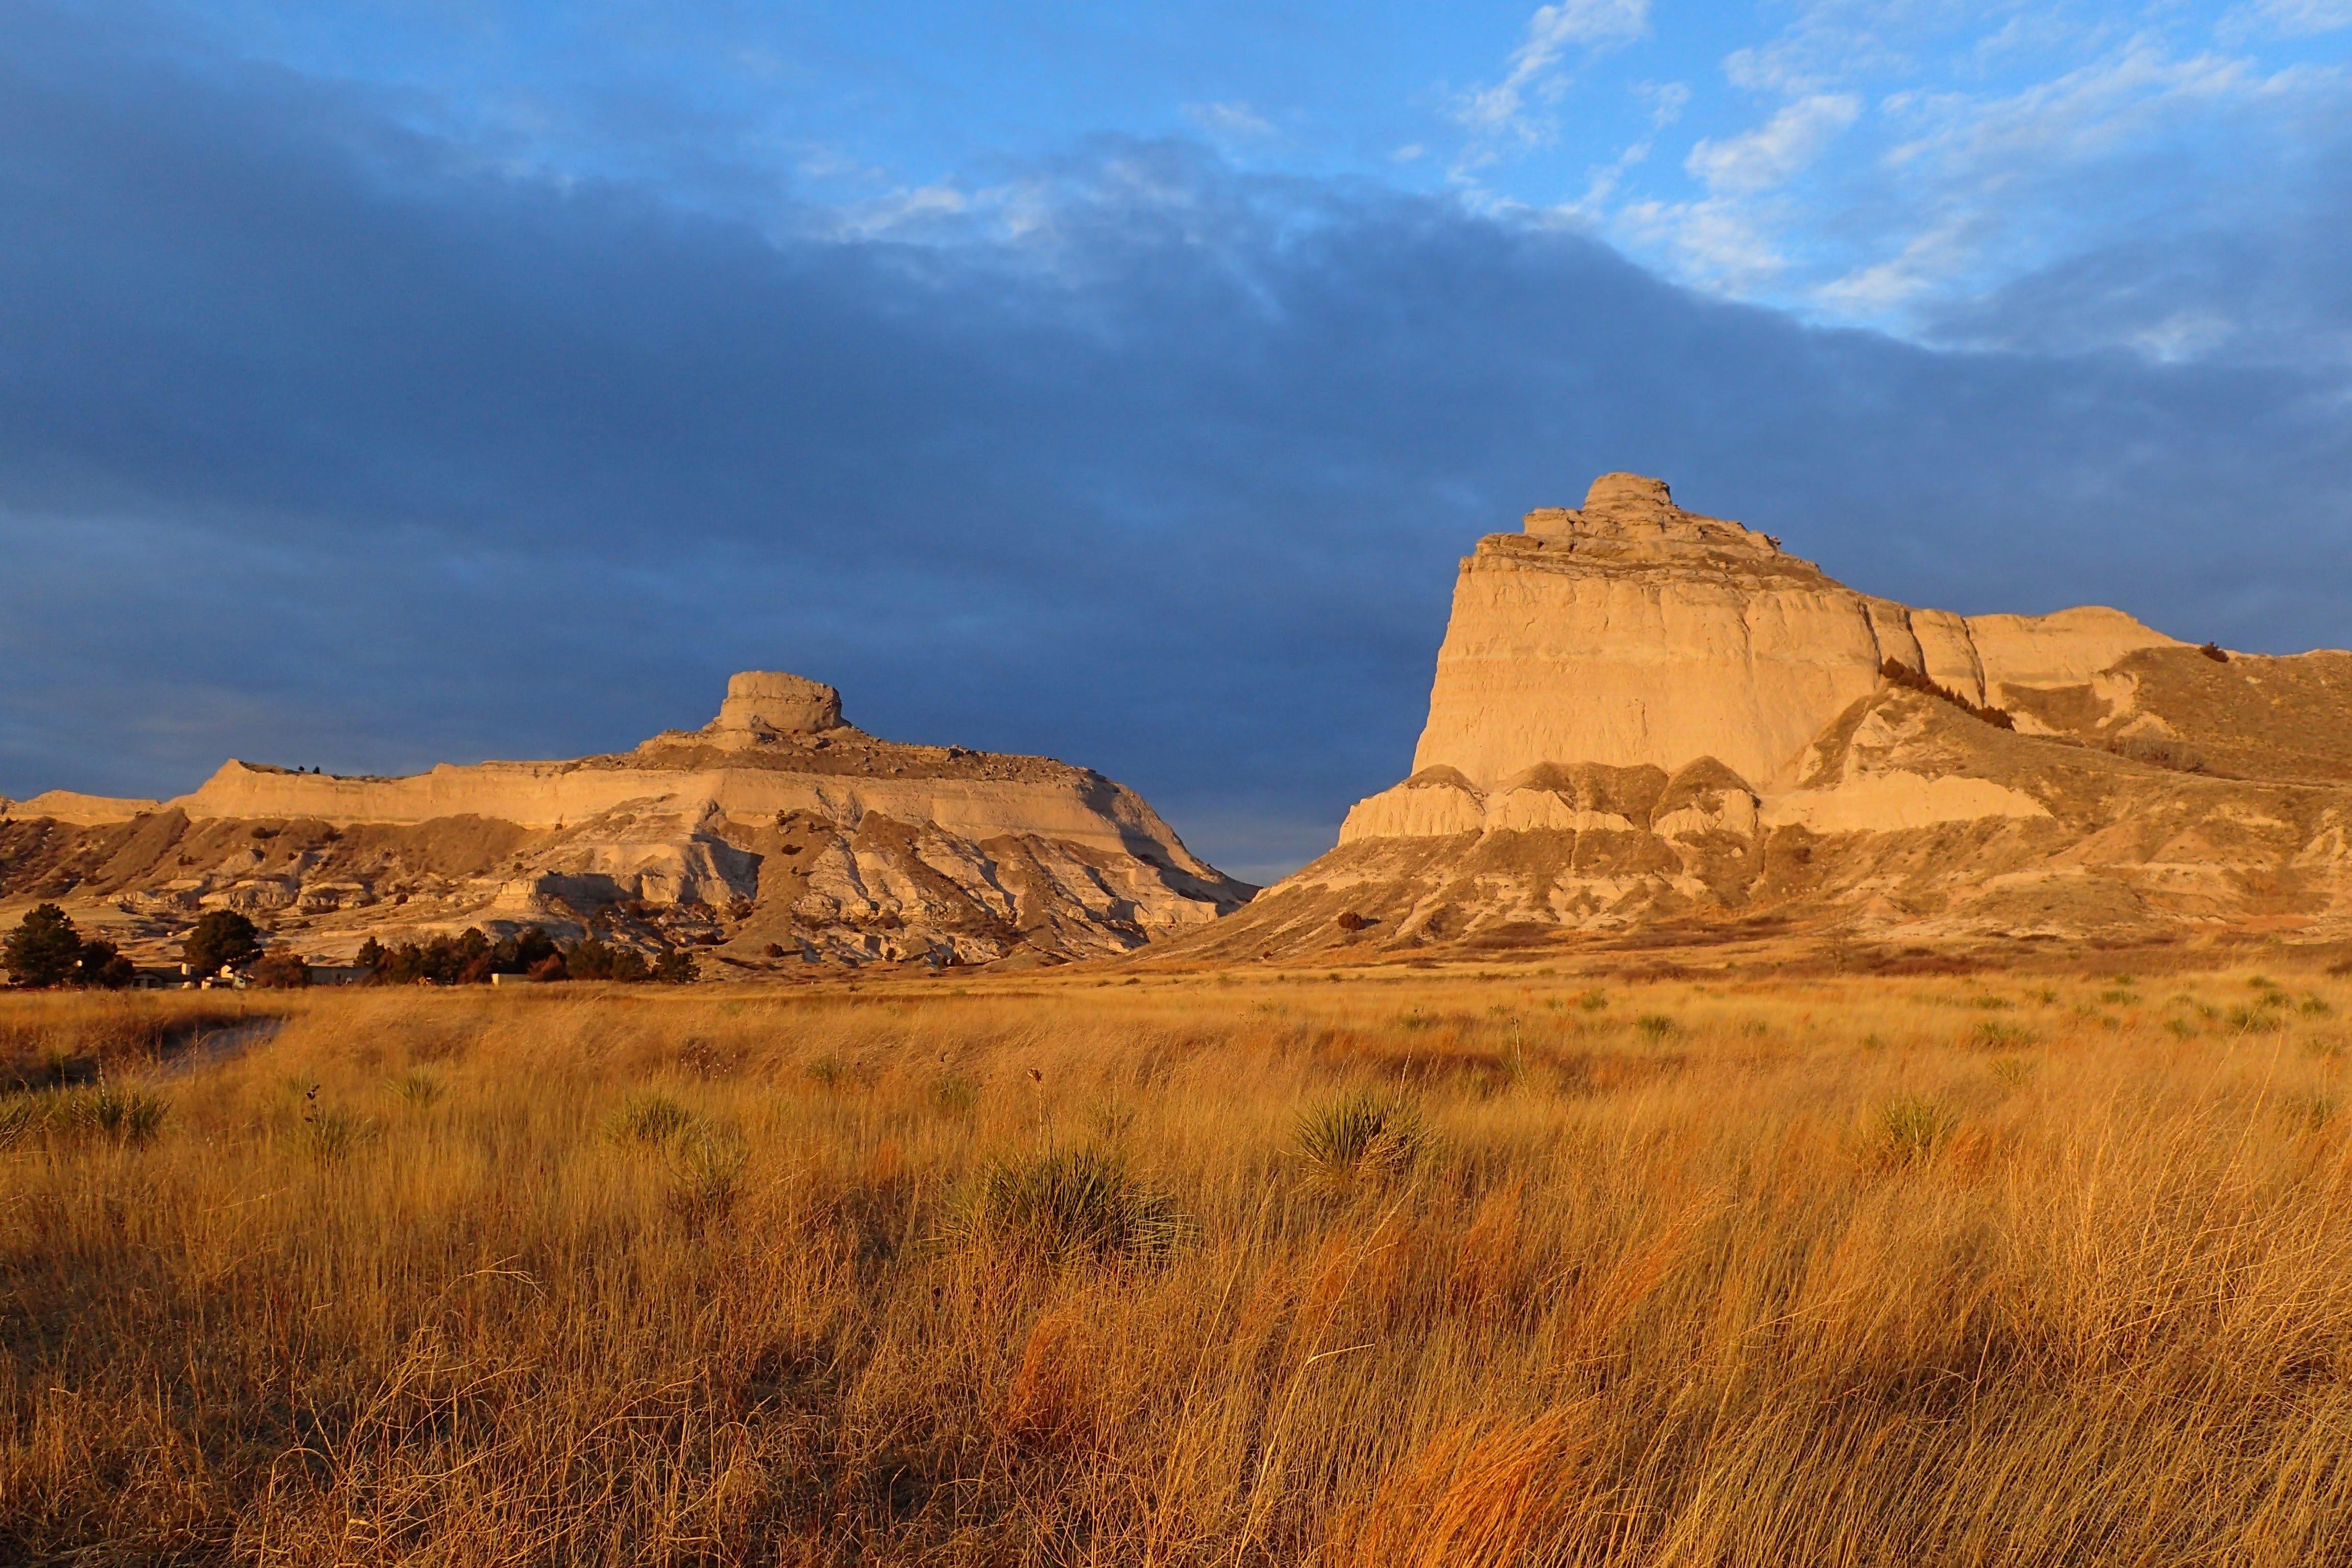 The distinctive rock formations of Mitchell Pass glow with early morning light.